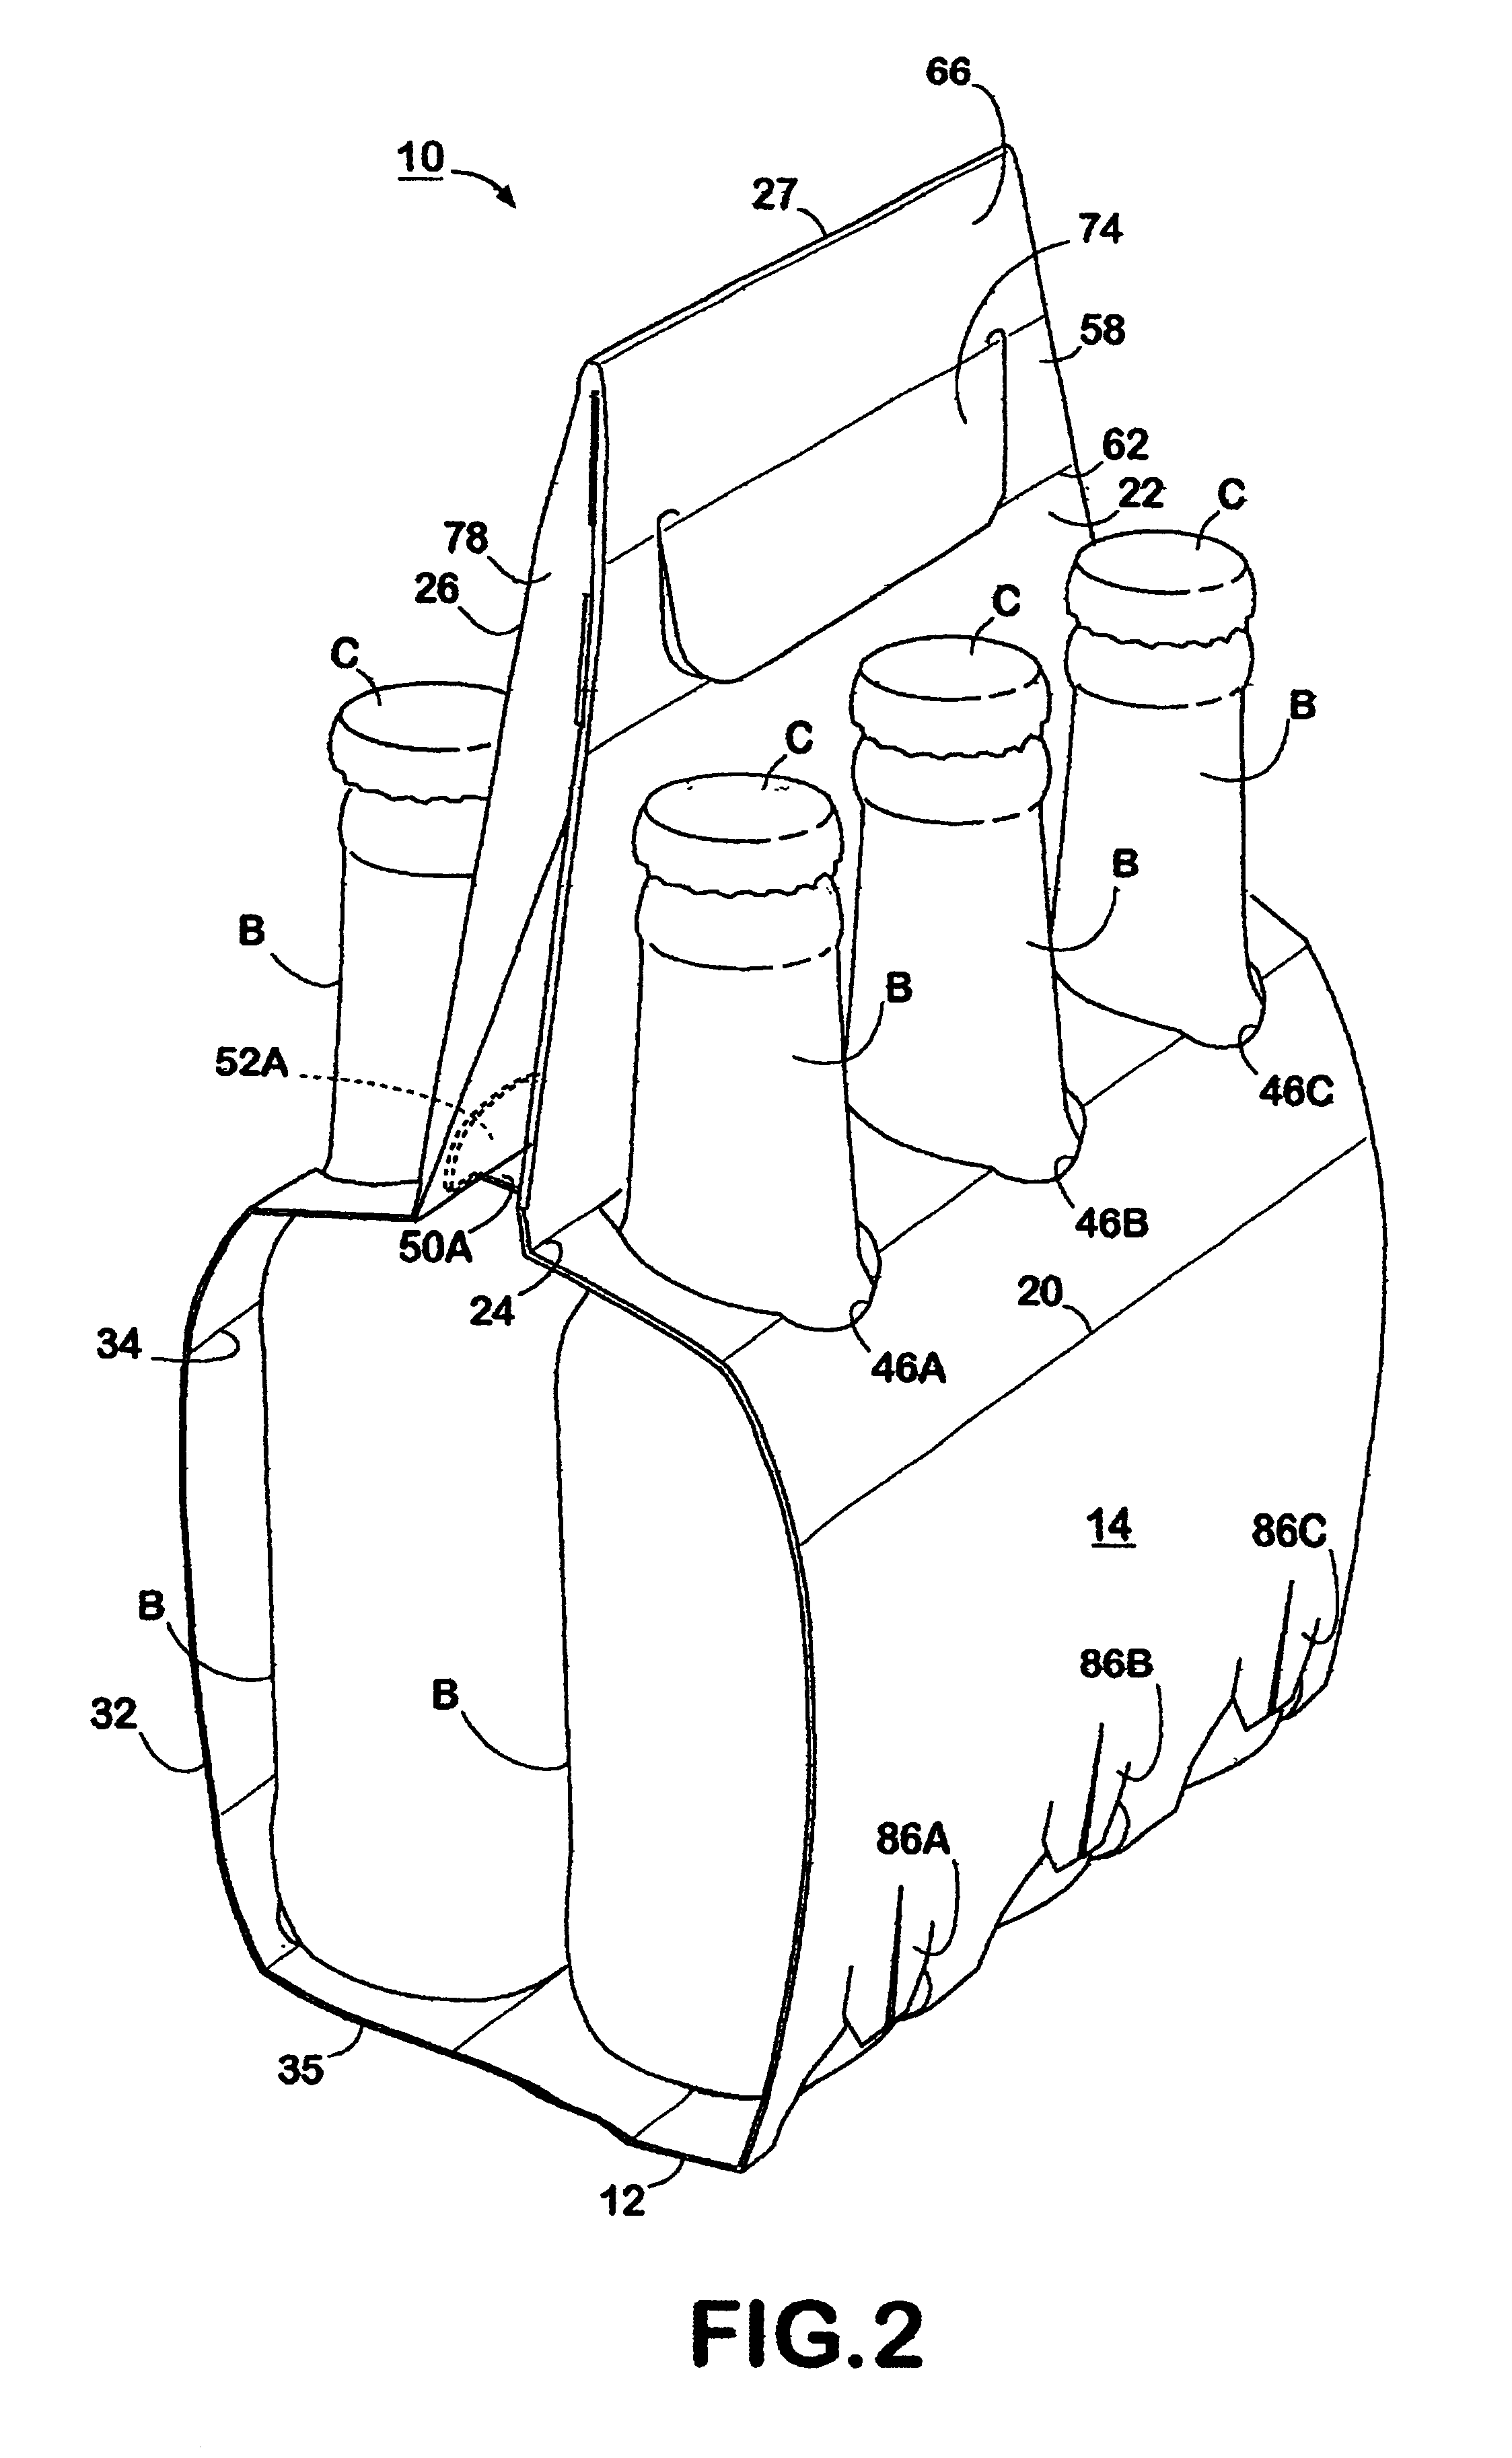 Bottle carrier with improved carrying handle